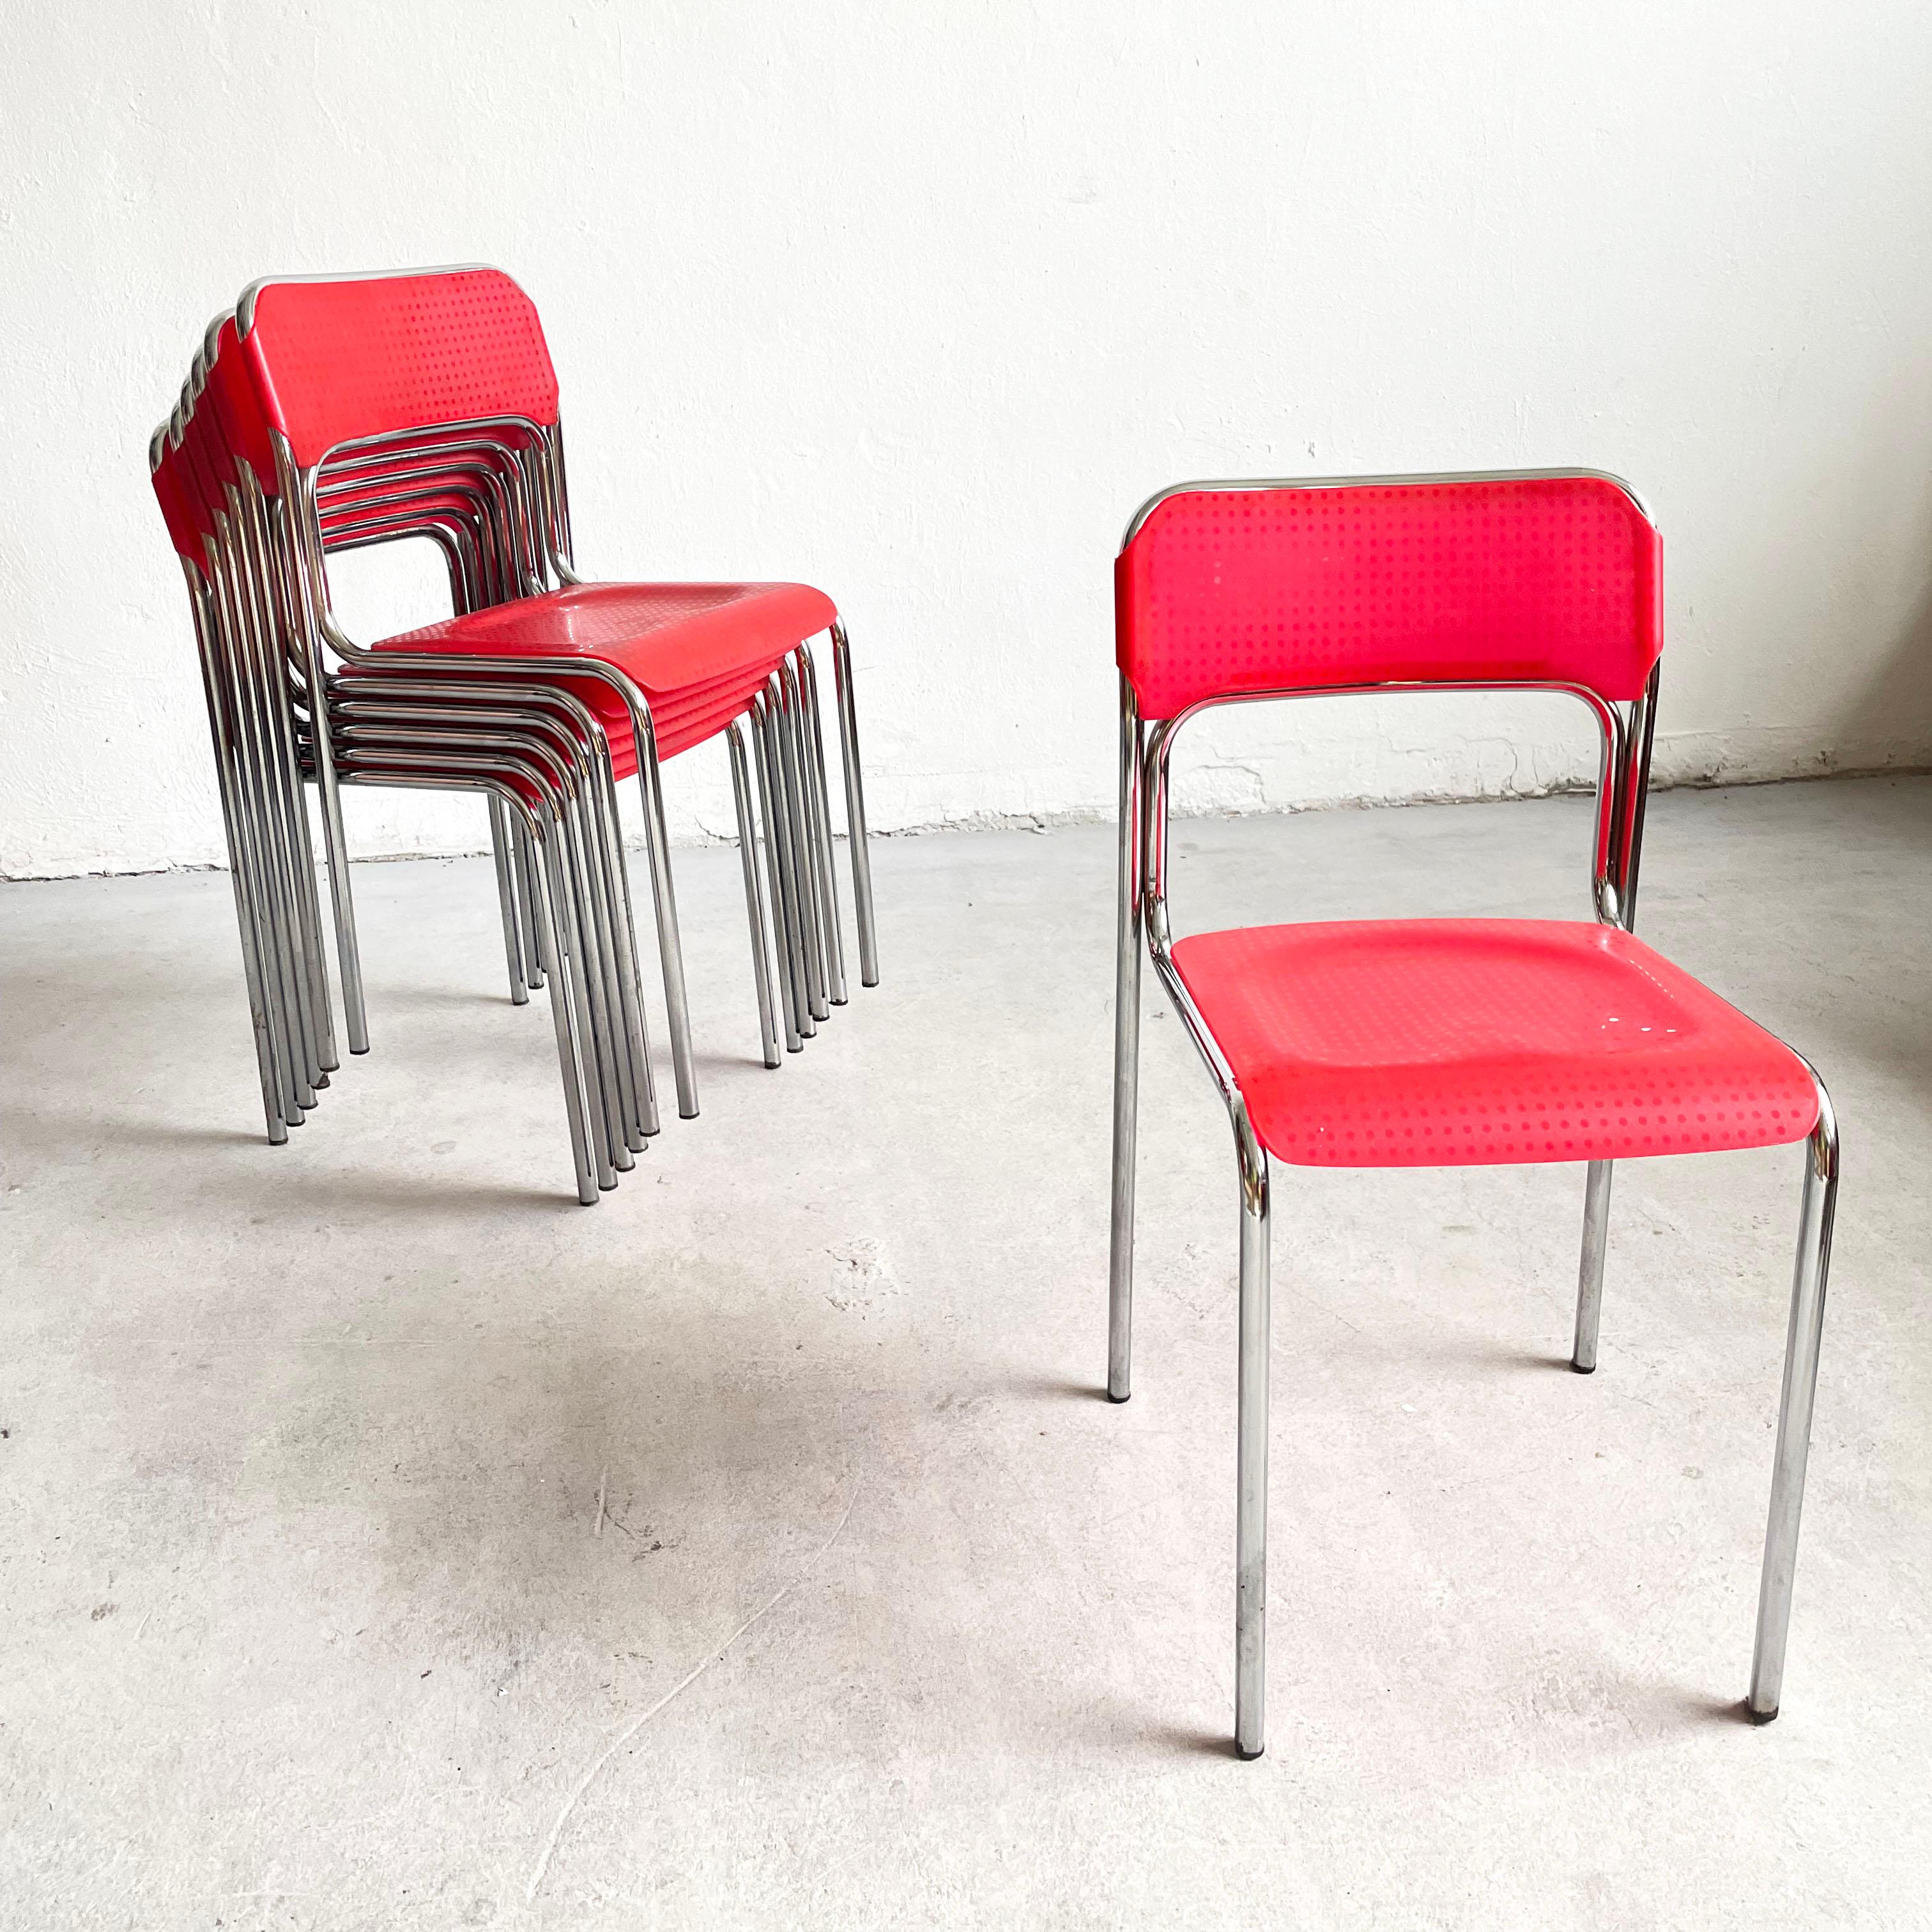 Set of 7 stacking bauhaus style Italian dining chairs (7th chair is a bonus)

The chairs were produced between 1970s and 1980s

The chairs feature sturdy tubular chrome frame and red plastic seat and backrest.

The chairs are in a very good vintage